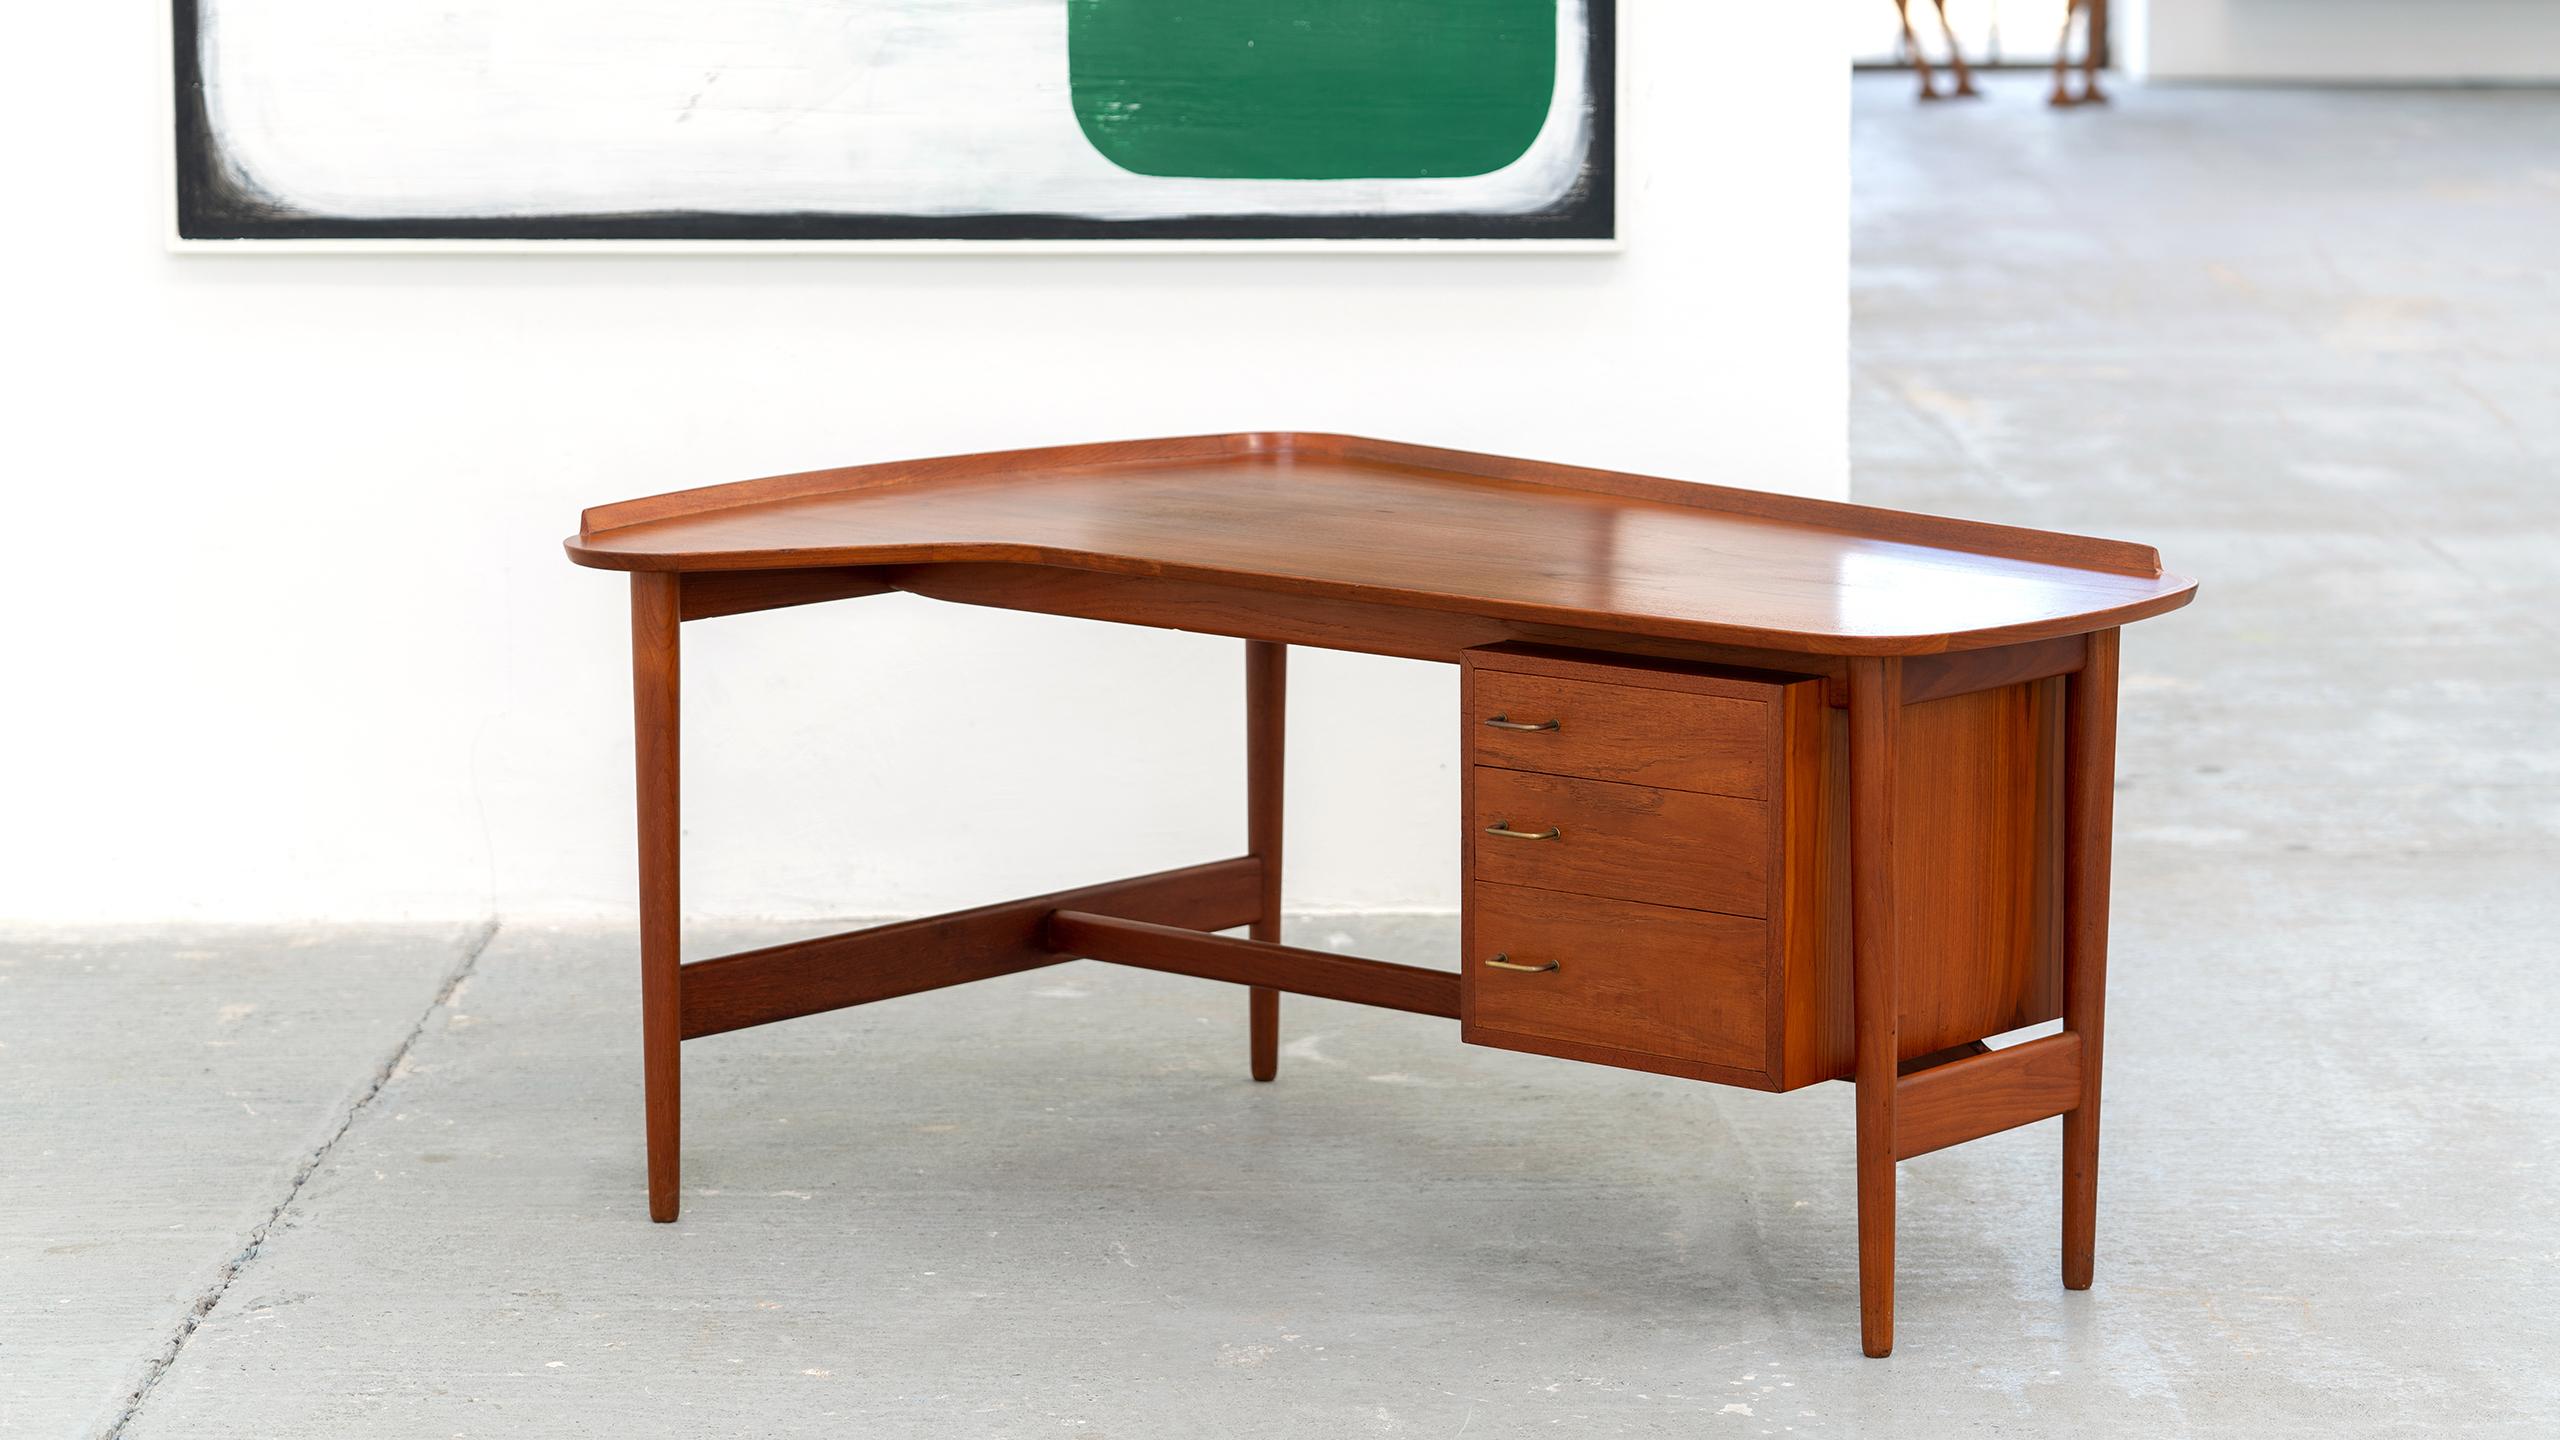 Arne Vodder 1956 for Bovirke, Denmark
rare Boomerang desk ’Model BO85’ in teak with brass handles

This desk was designed by Arne Vodder for Bovirke. The desk has an organically shaped table top with raised edges. The handcrafted details are